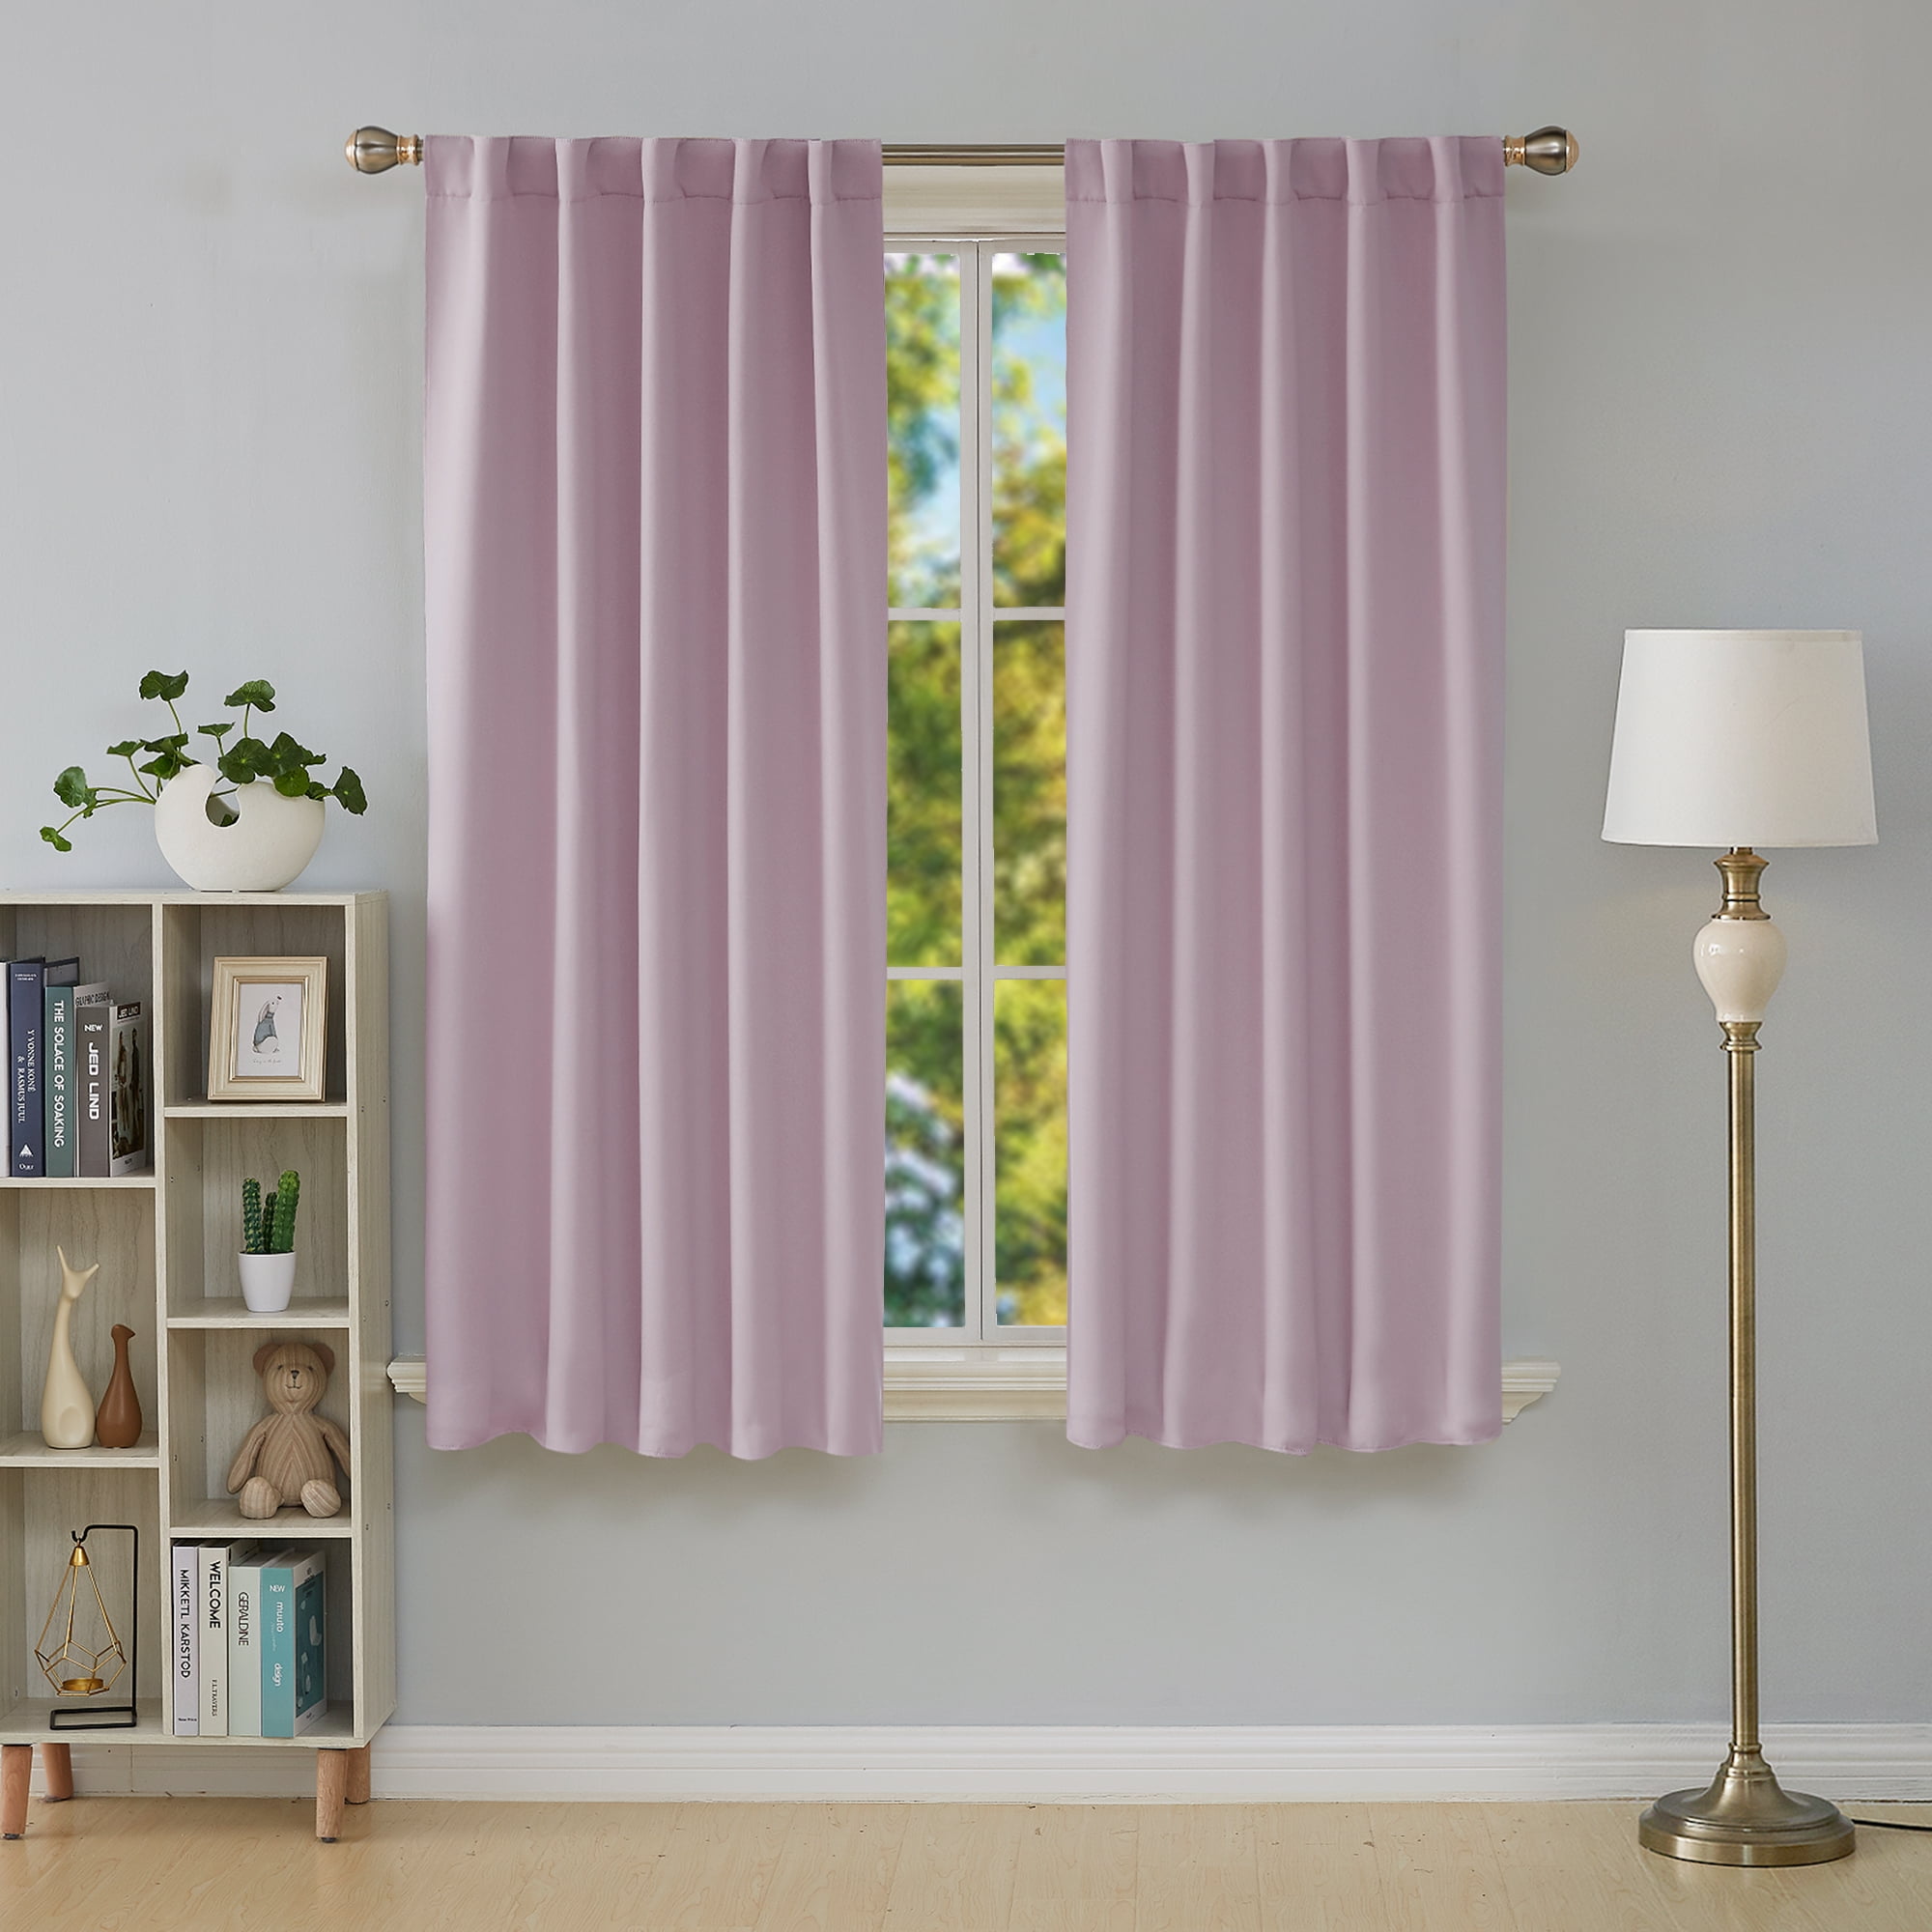 Stick to tent outlet is 100% Italian Chrome Drapes Modern k3 6 